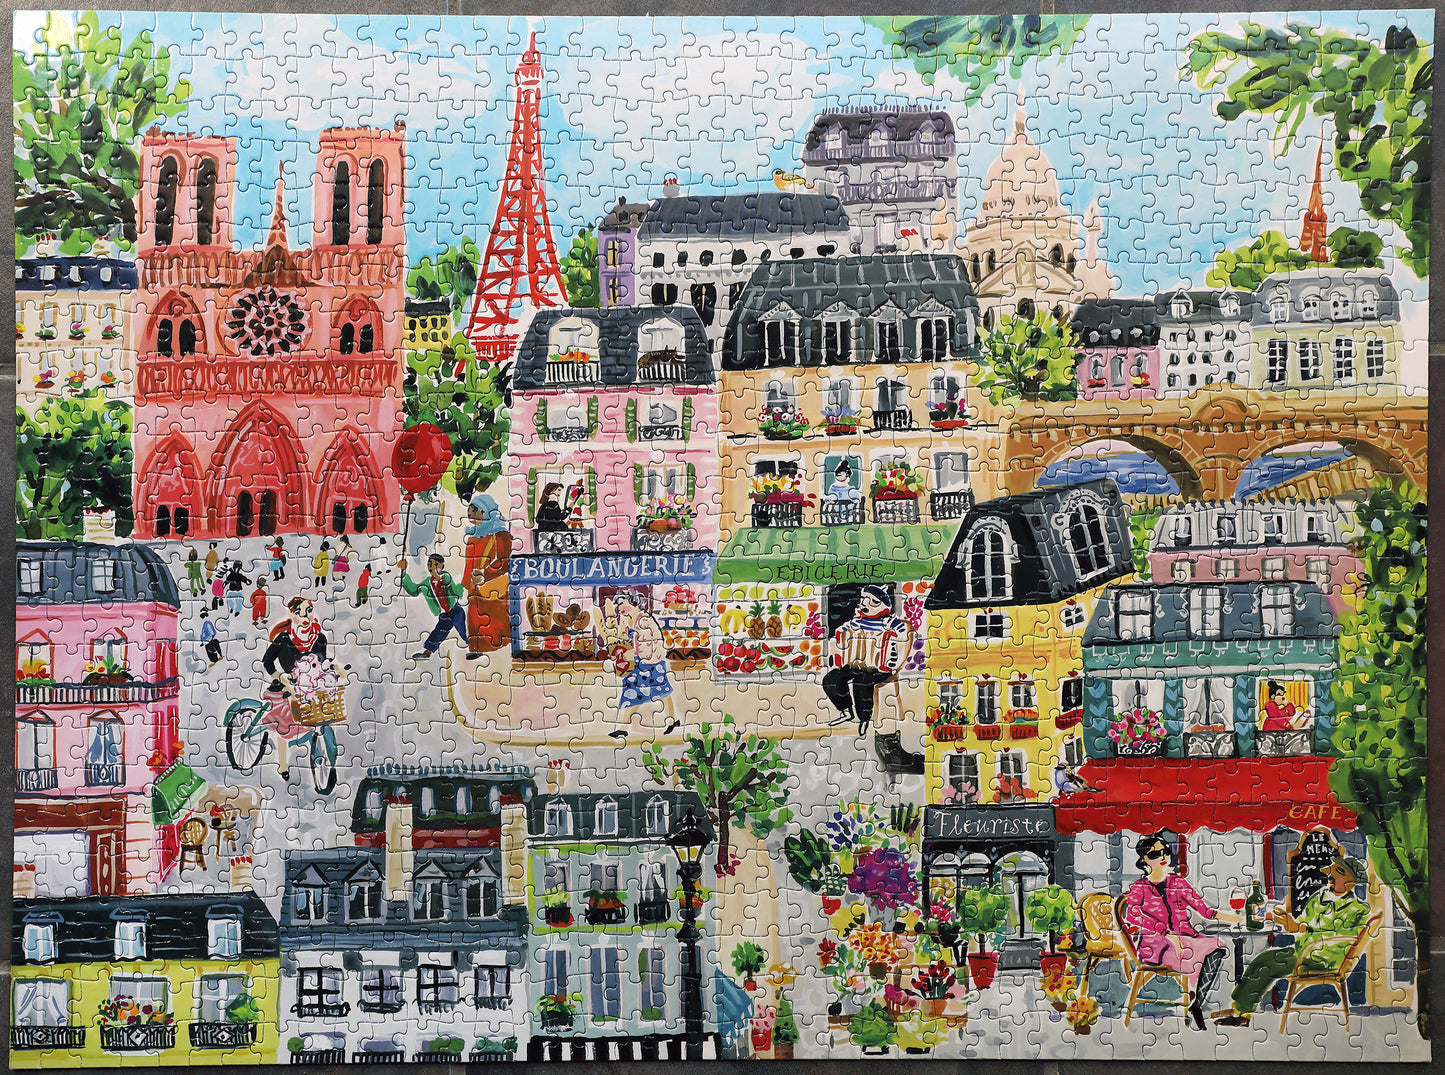 Paris France in a Day 1000 Piece Rectangle Jigsaw Puzzle | eeBoo Piece & Love